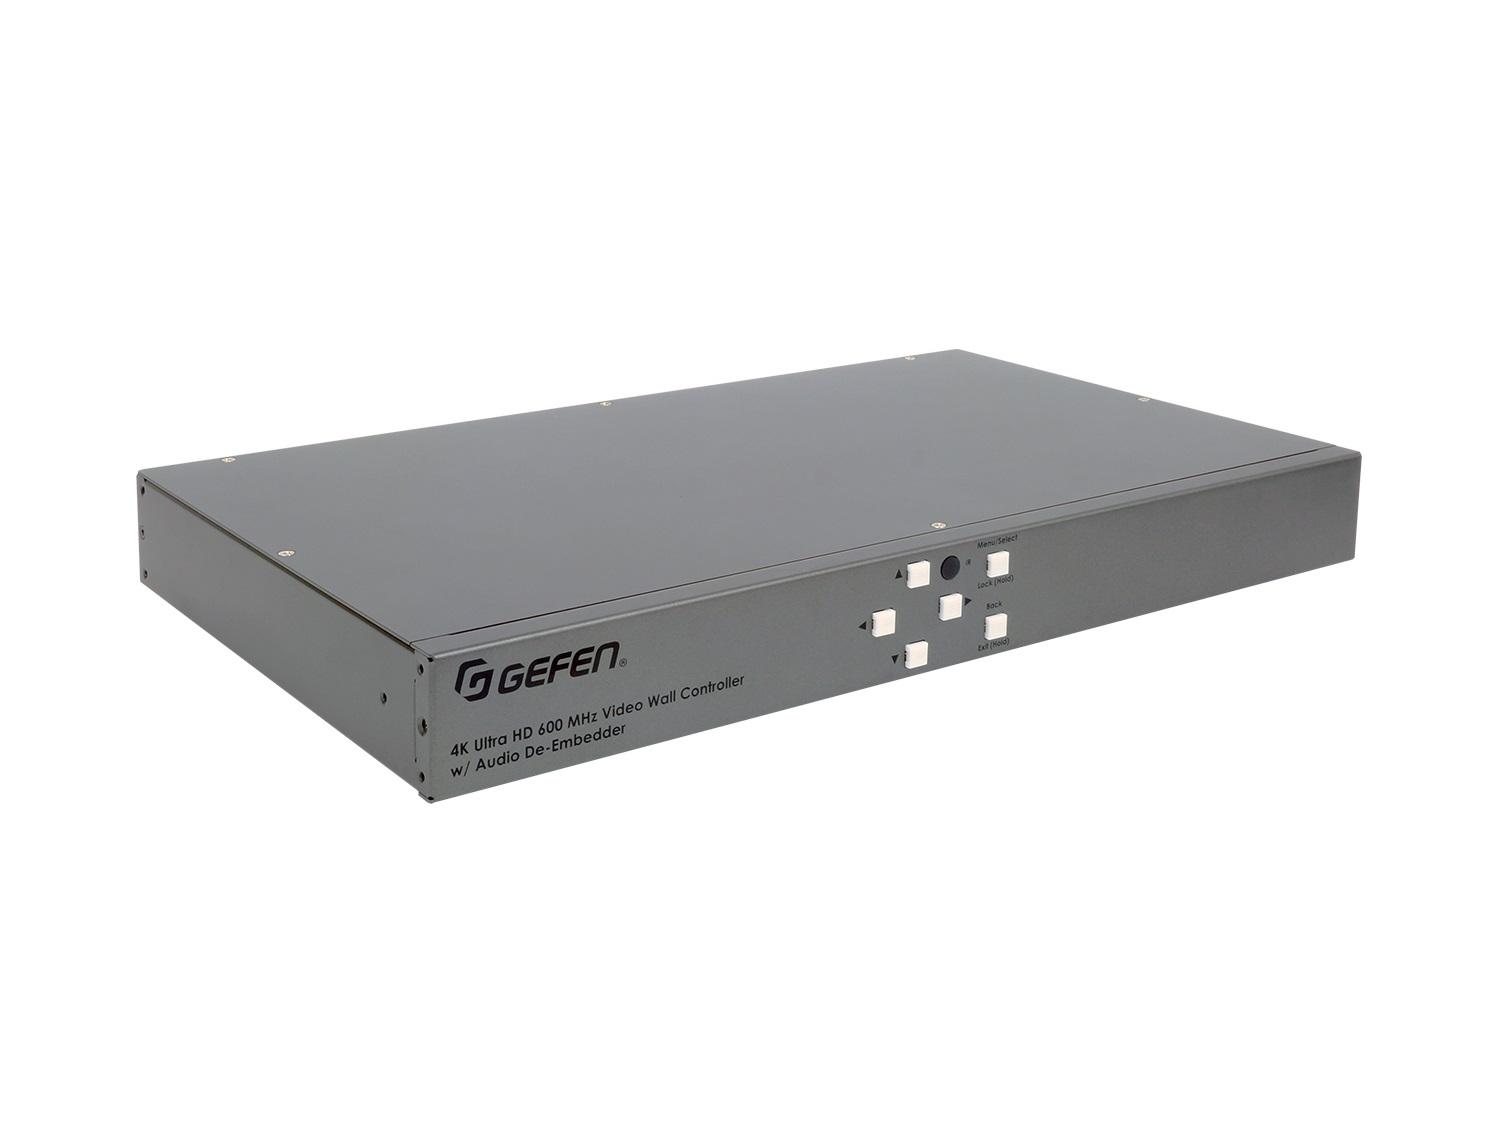 EXT-UHD600A-VWC-14 4K Ultra HD 600 MHz 1x4 Video Wall Controller with Audio De-Embedder by Gefen